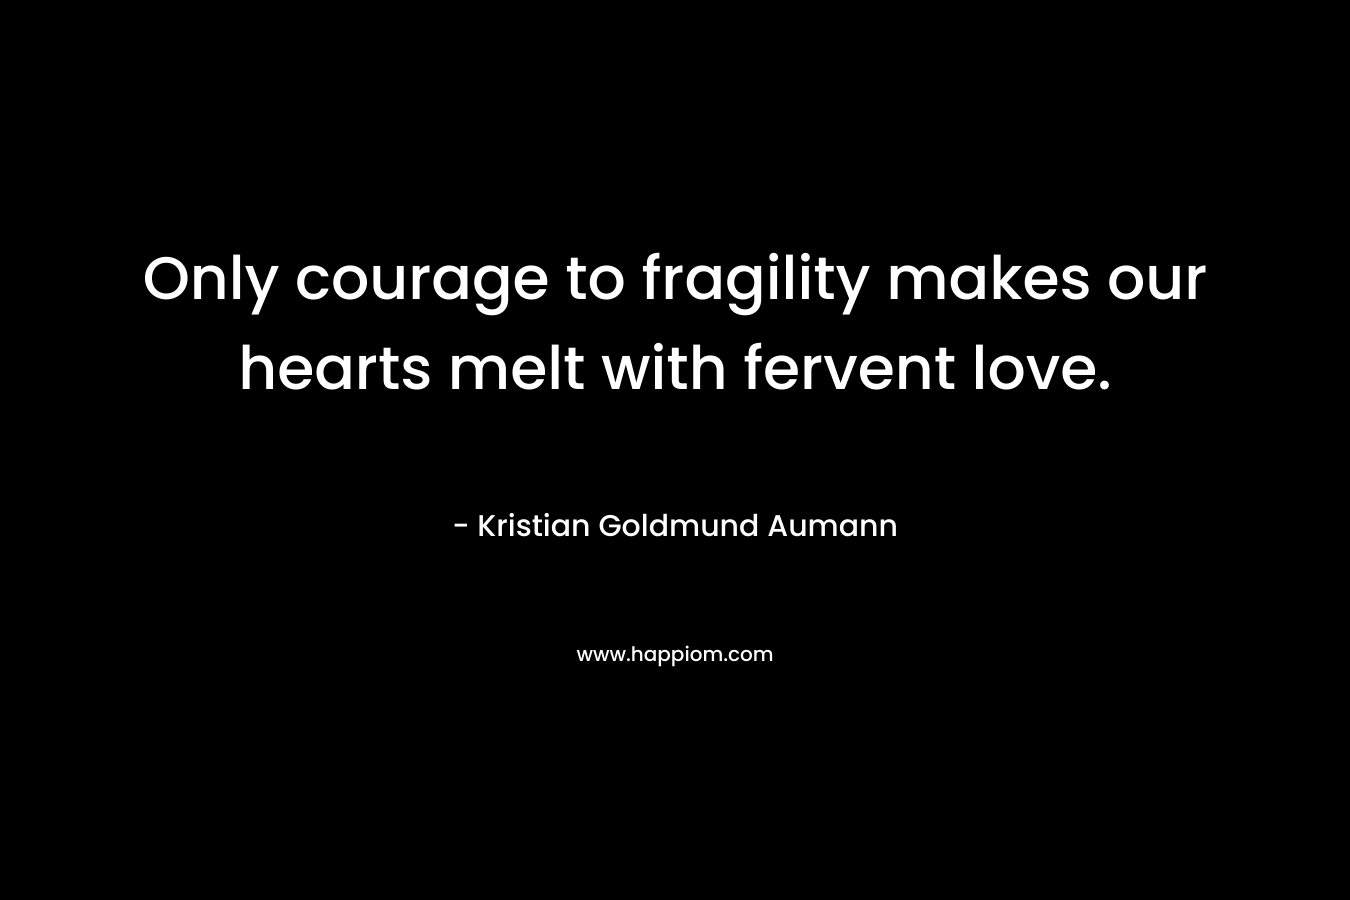 Only courage to fragility makes our hearts melt with fervent love.